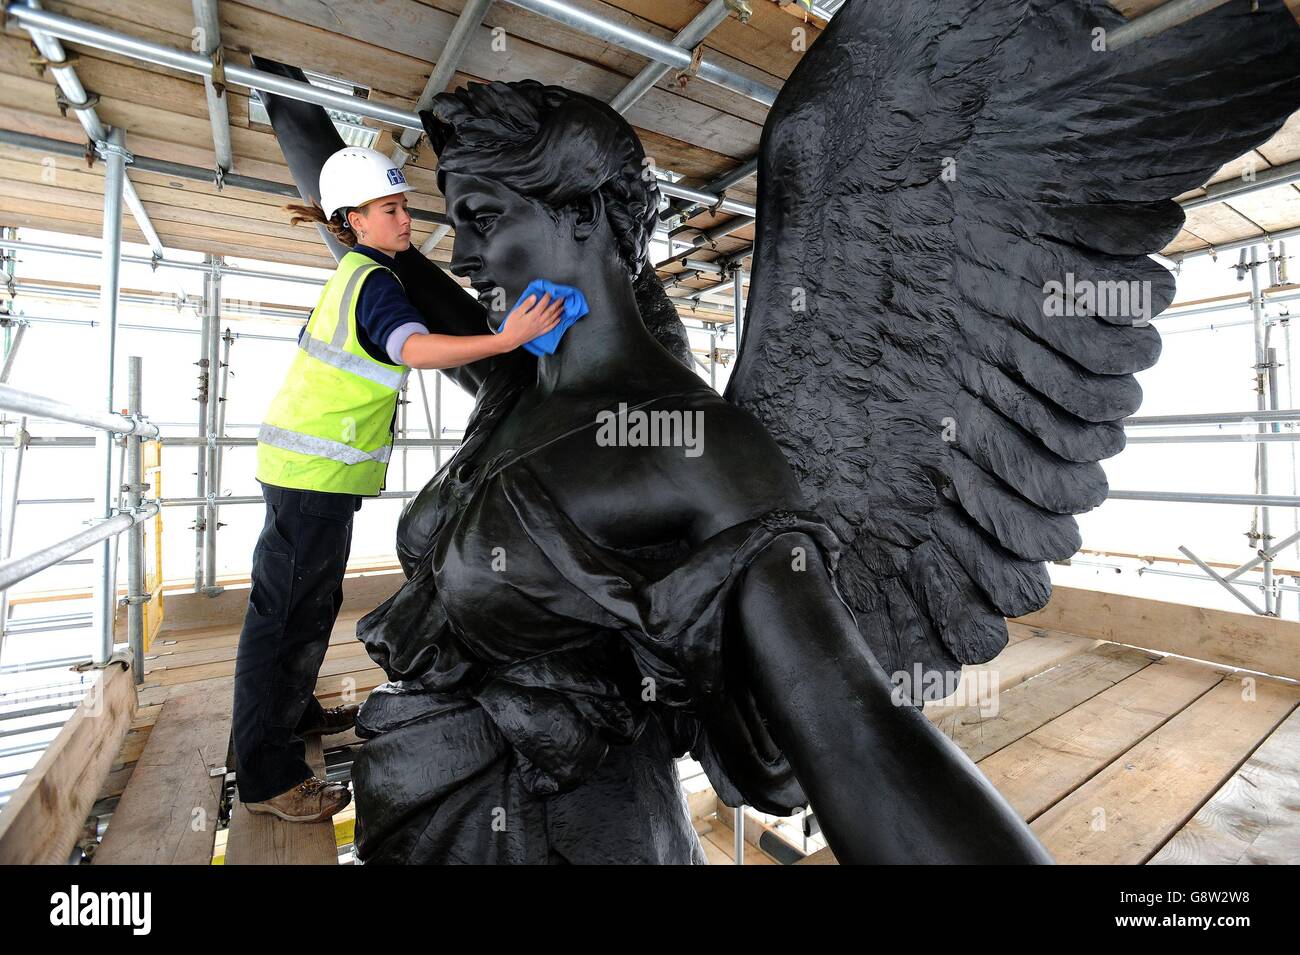 Freelance sculpture conservator Scarlett Hutchin, working for English Heritage, buffs wax polish applied to artist Adrian Jones' sculpture, Quadriga, on top of Wellington Arch at Hyde Park Corner, depicting four horses, representing the forces of chaos and war pulling a chariot, being calmed by the angel of peace, as the landmark sculpture is being cleaned, repaired and re-waxed by a team of specialists as part of a major English Heritage conservation programme. Stock Photo